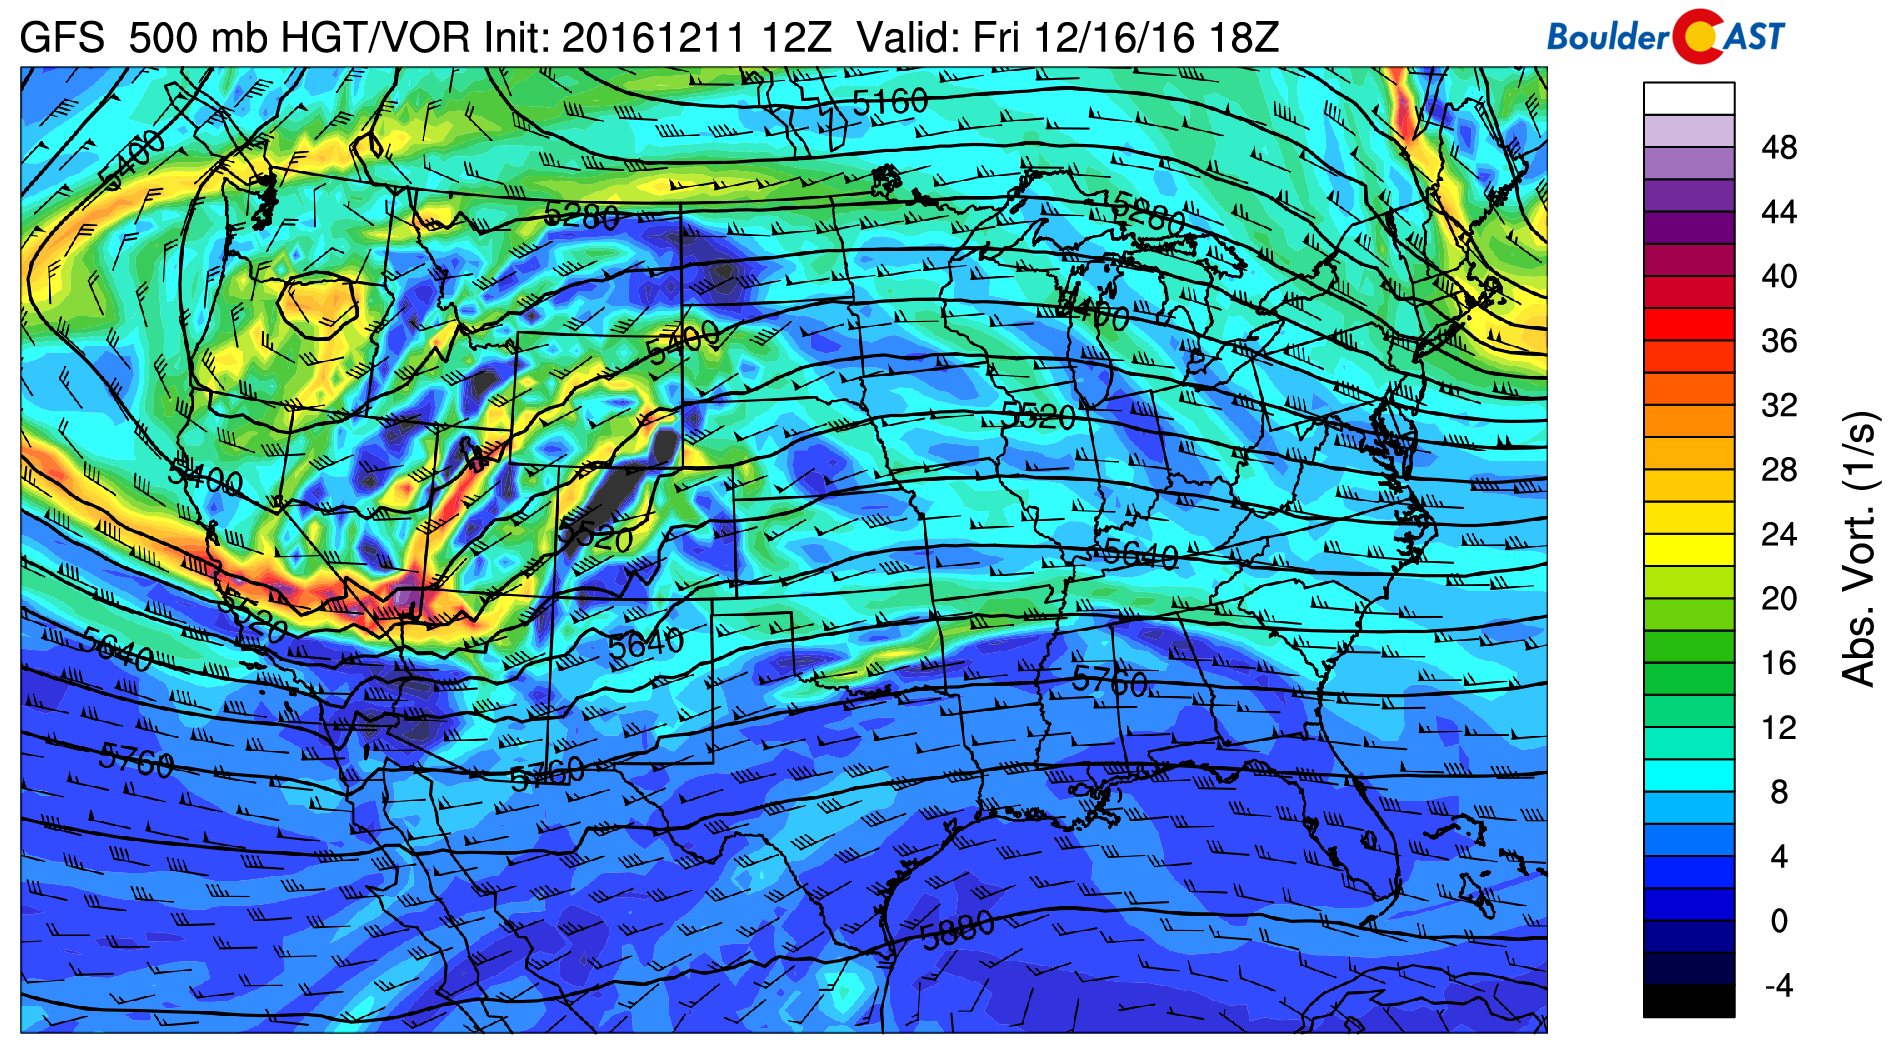 GFS 500mb vorticity map showing a broad trough coming ashore from the Pacific